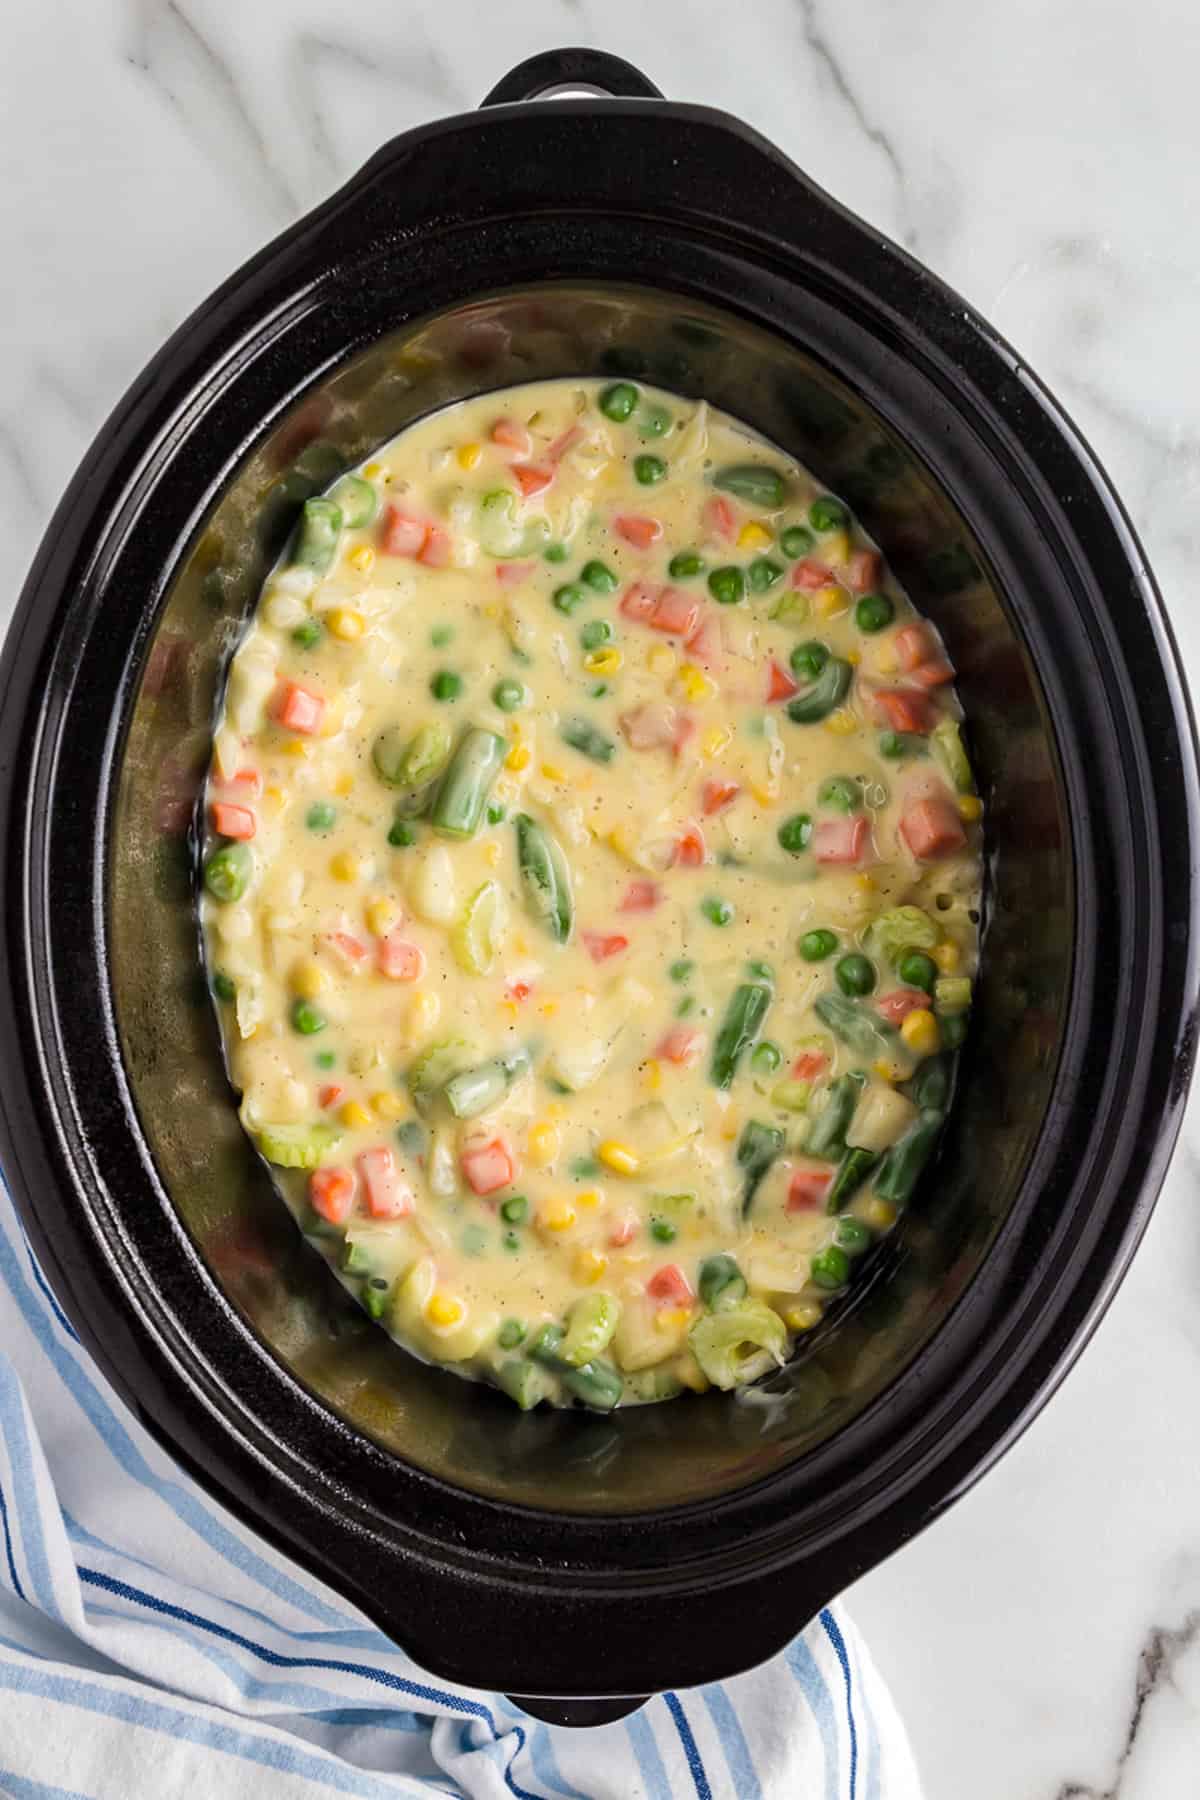 Slow cooker with chicken pot pie in it